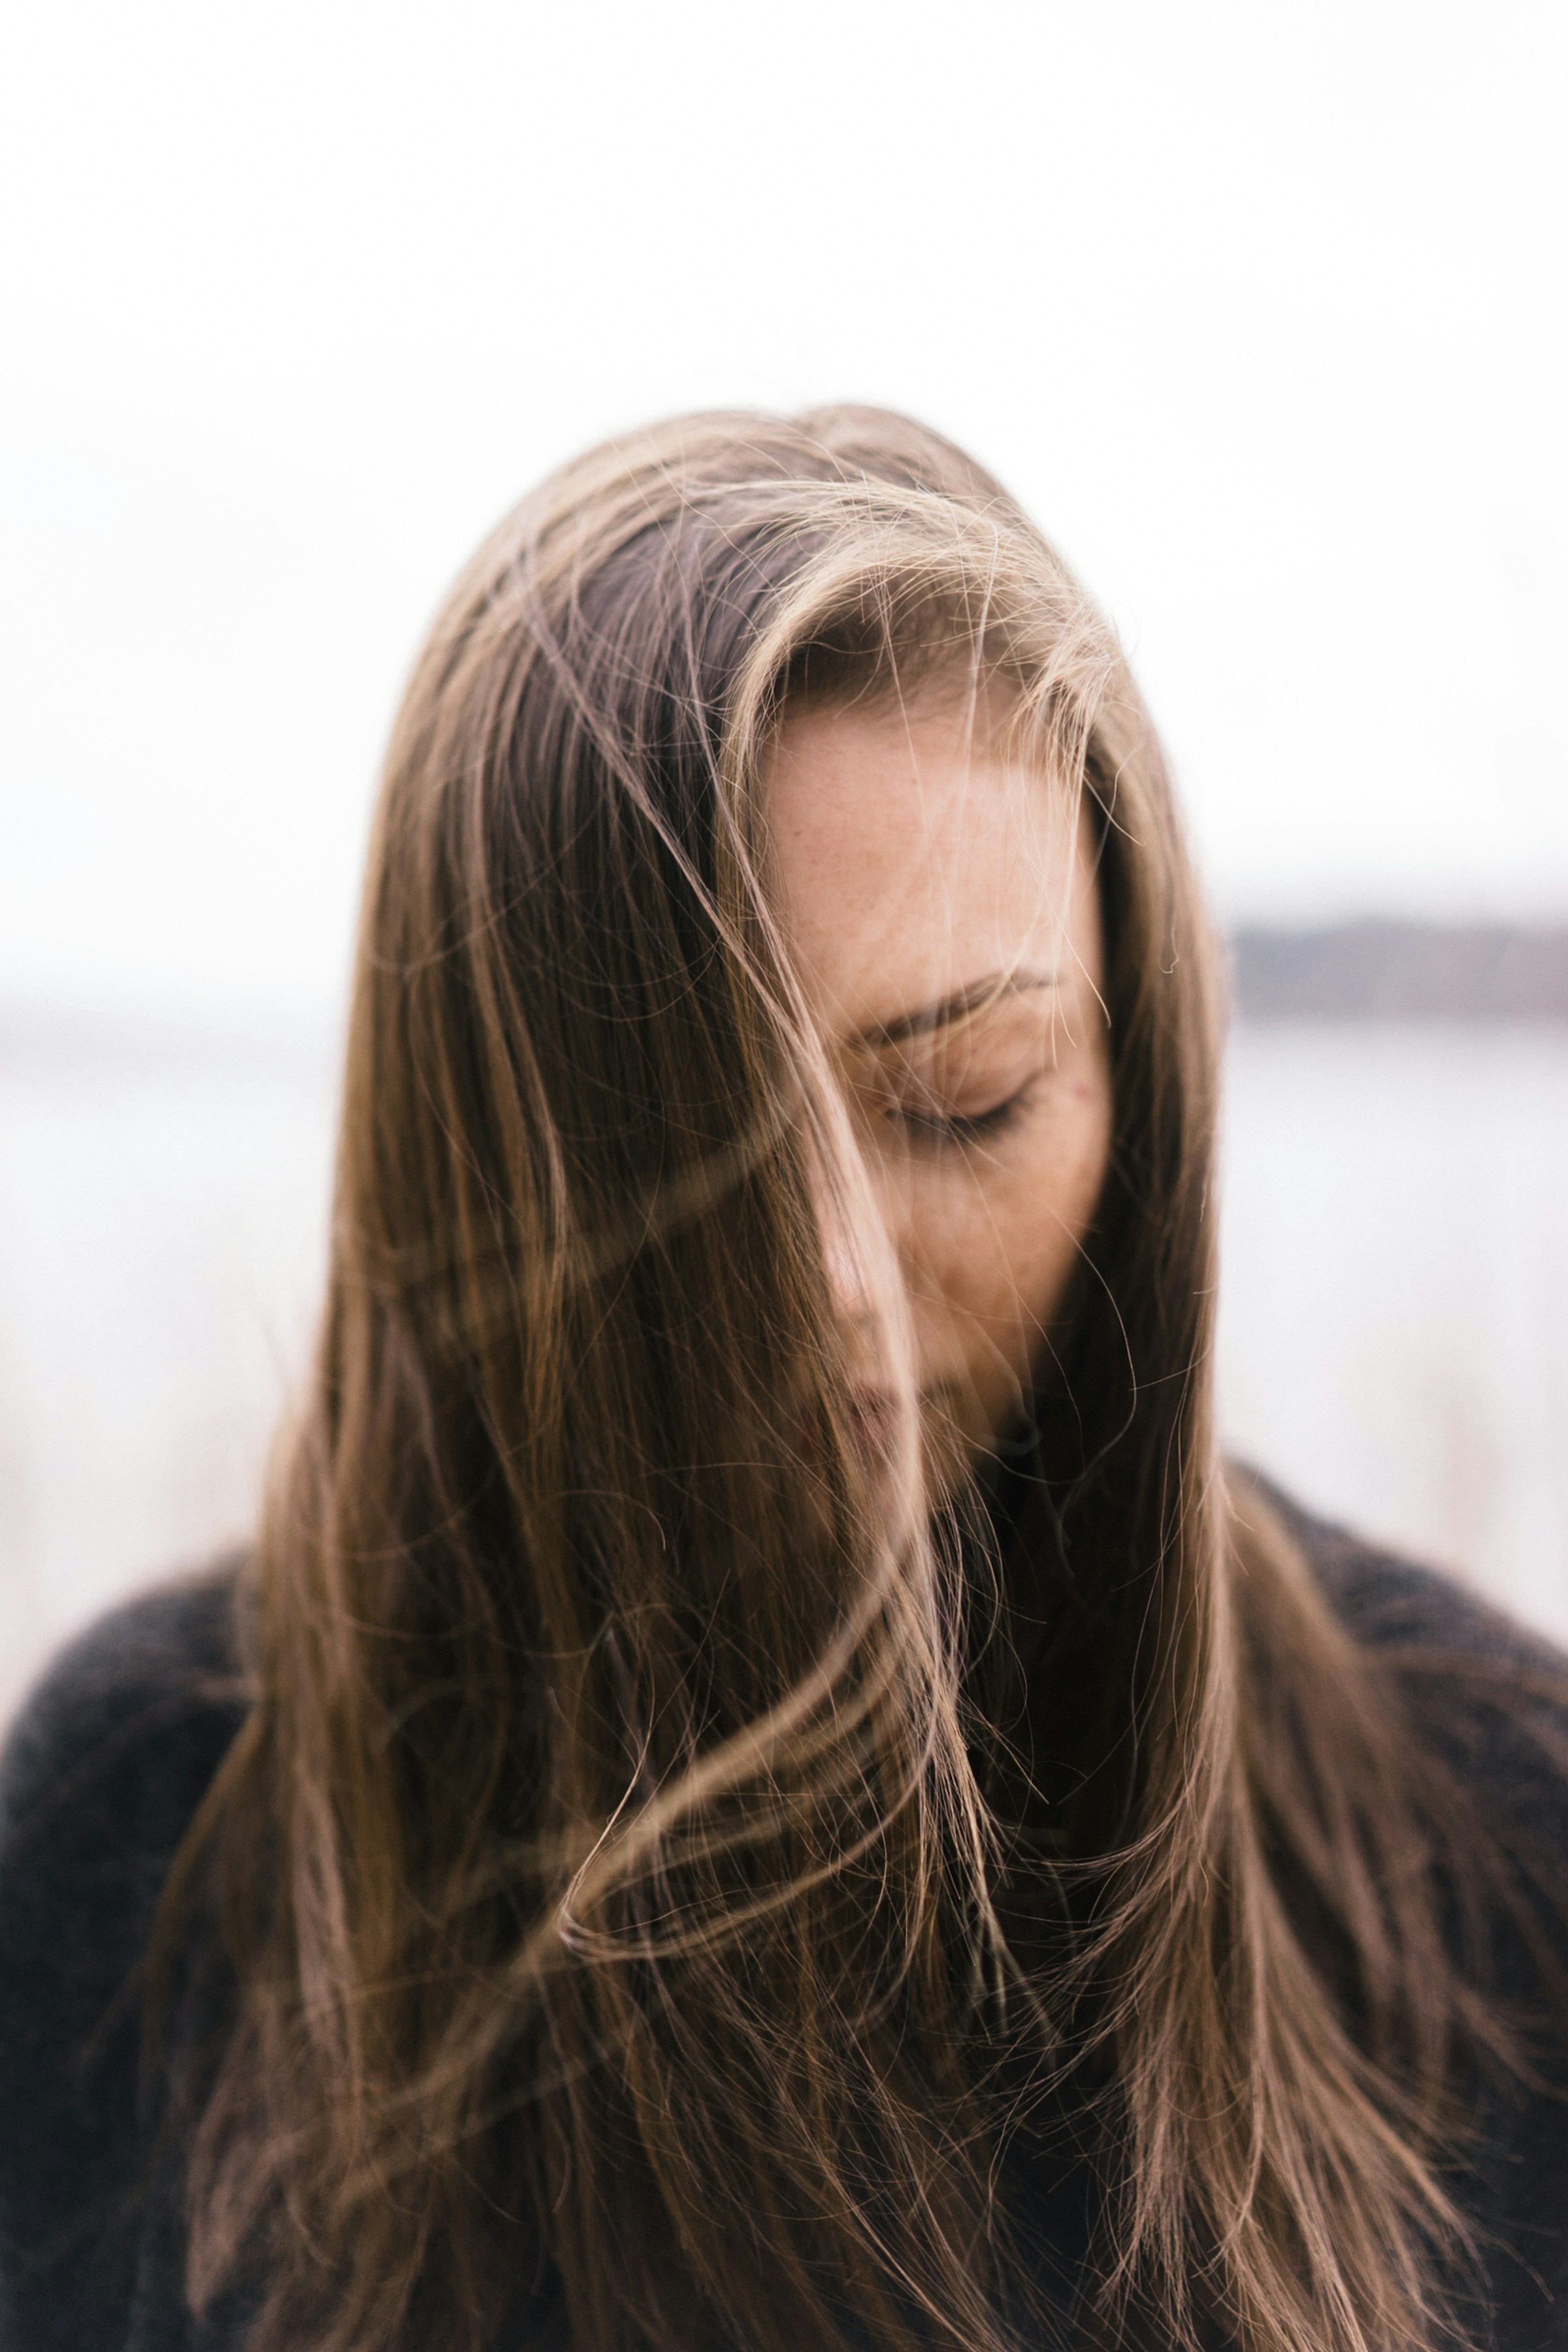 A woman with her eyes closed | Source: Unsplash